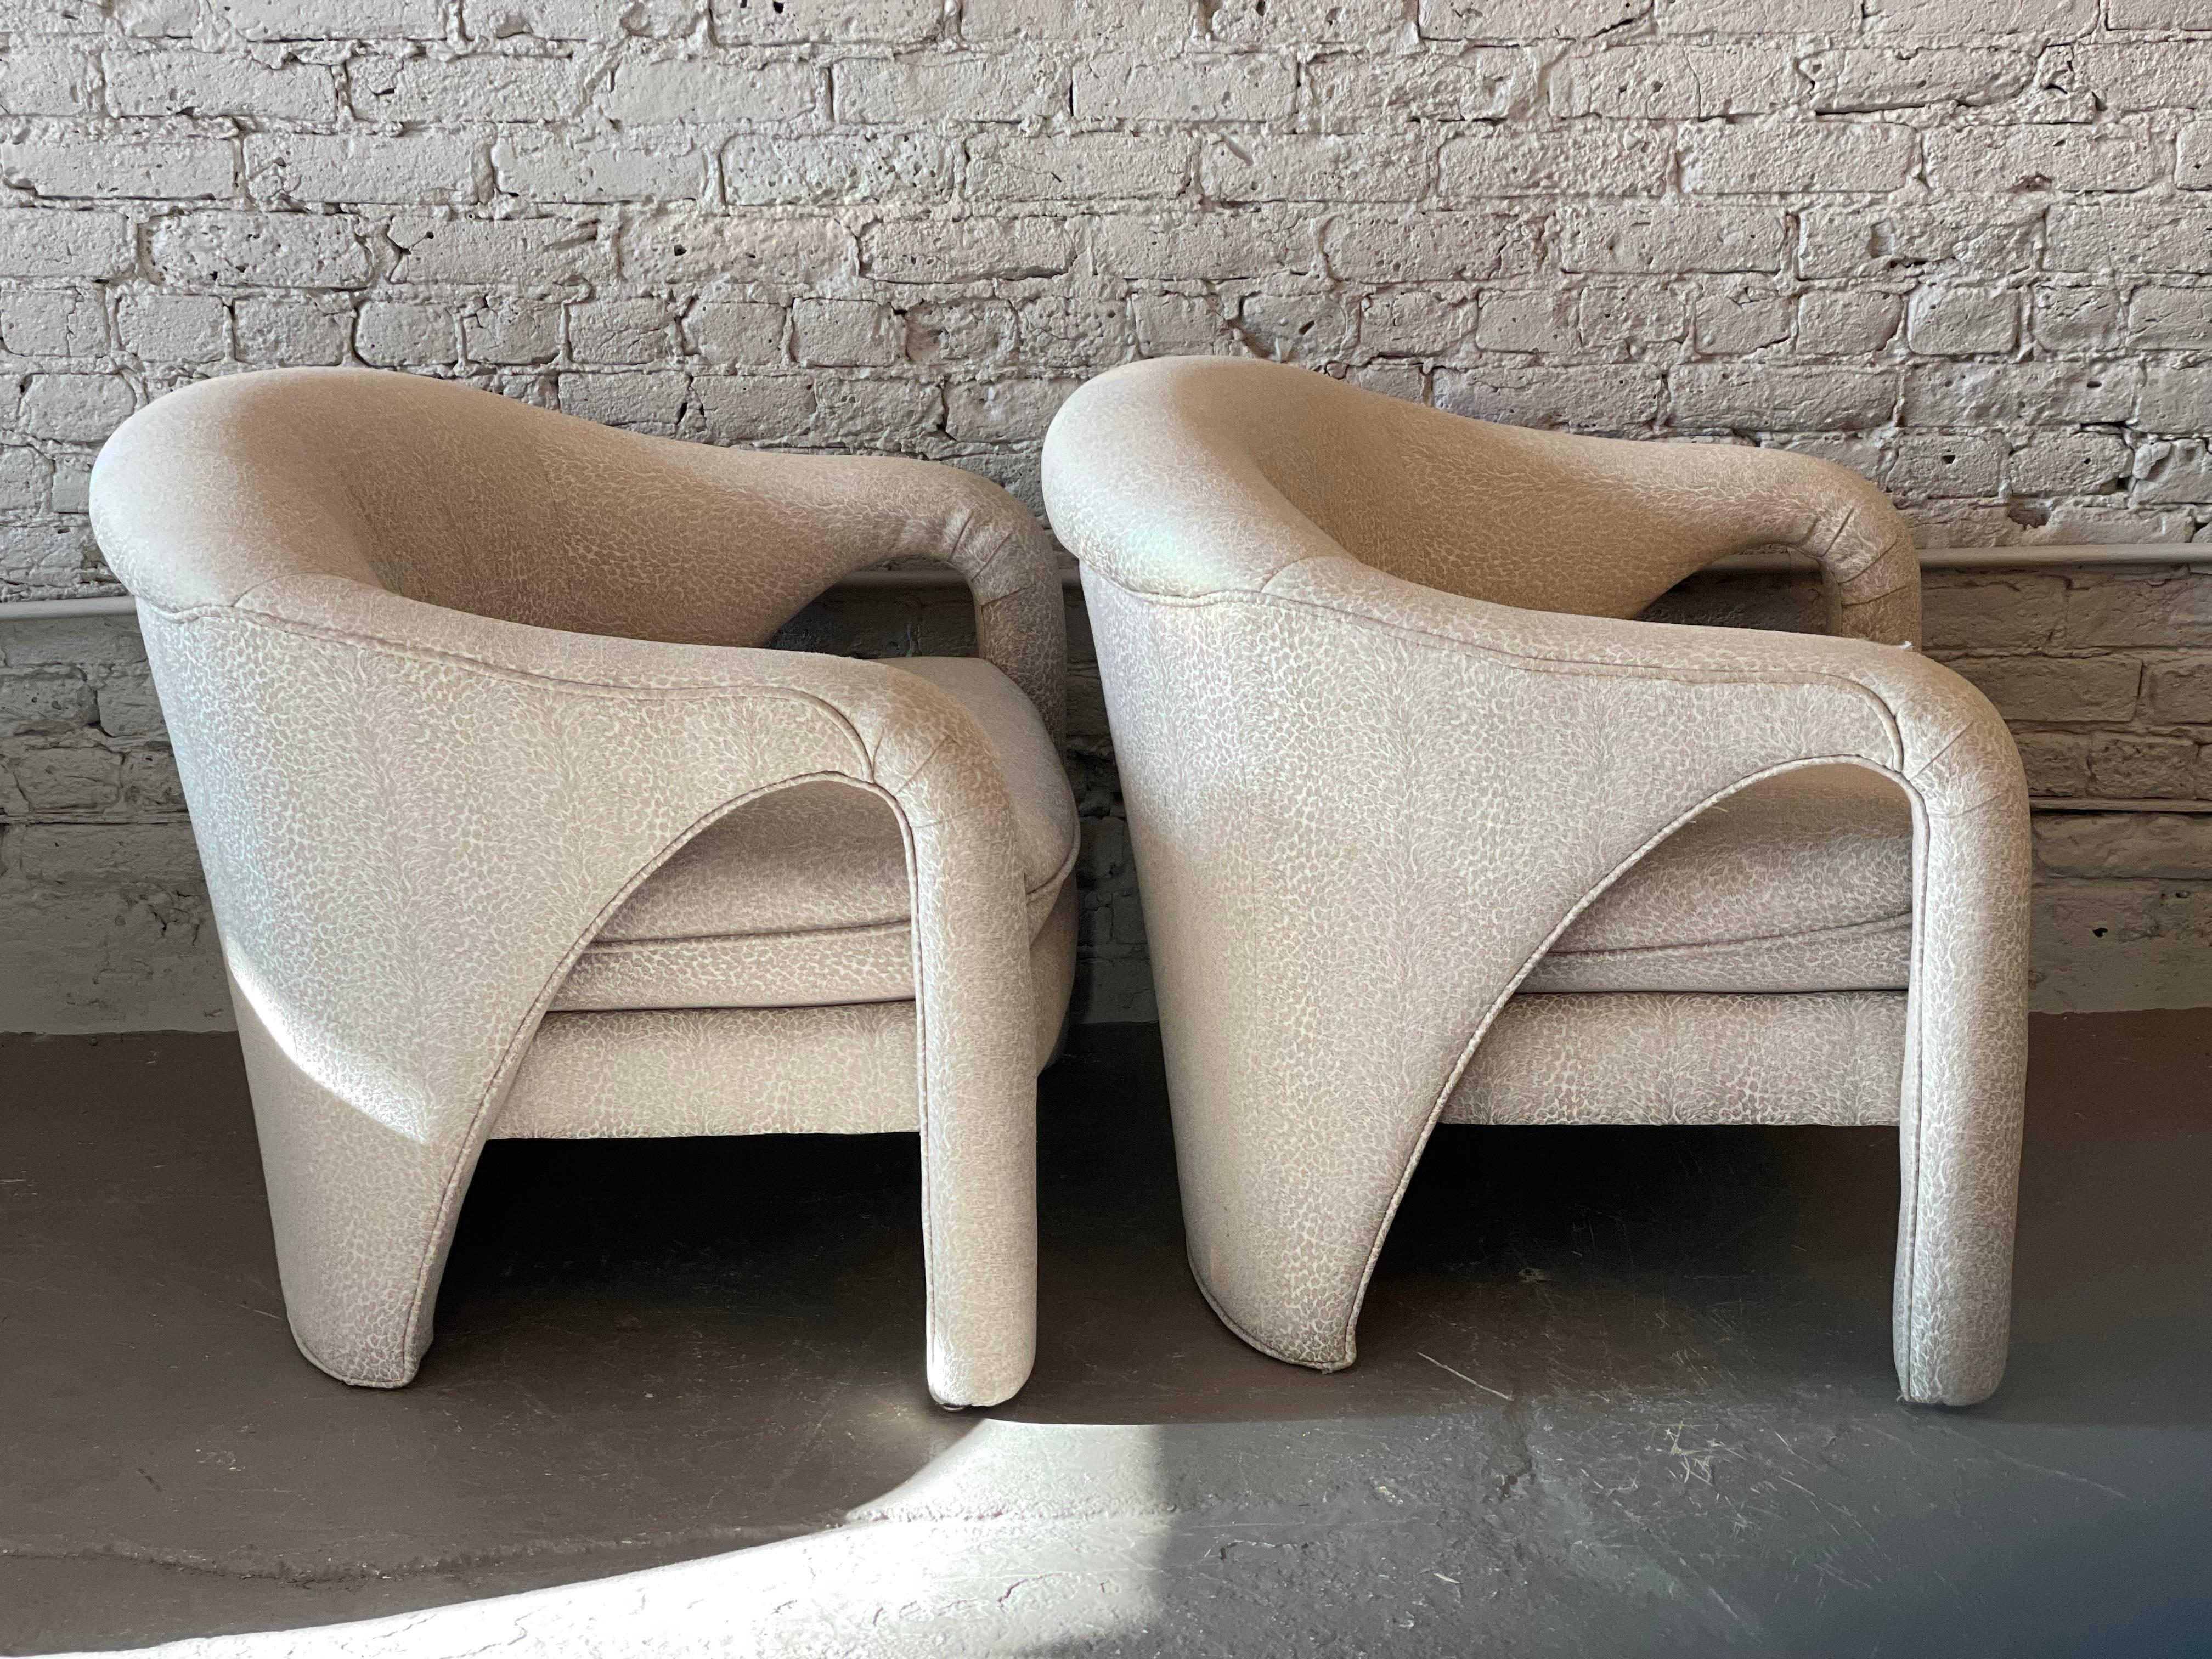 1980s Postmodern Sculptural Arc Chairs in Beige Upholstery, a Pair In Good Condition For Sale In Chicago, IL